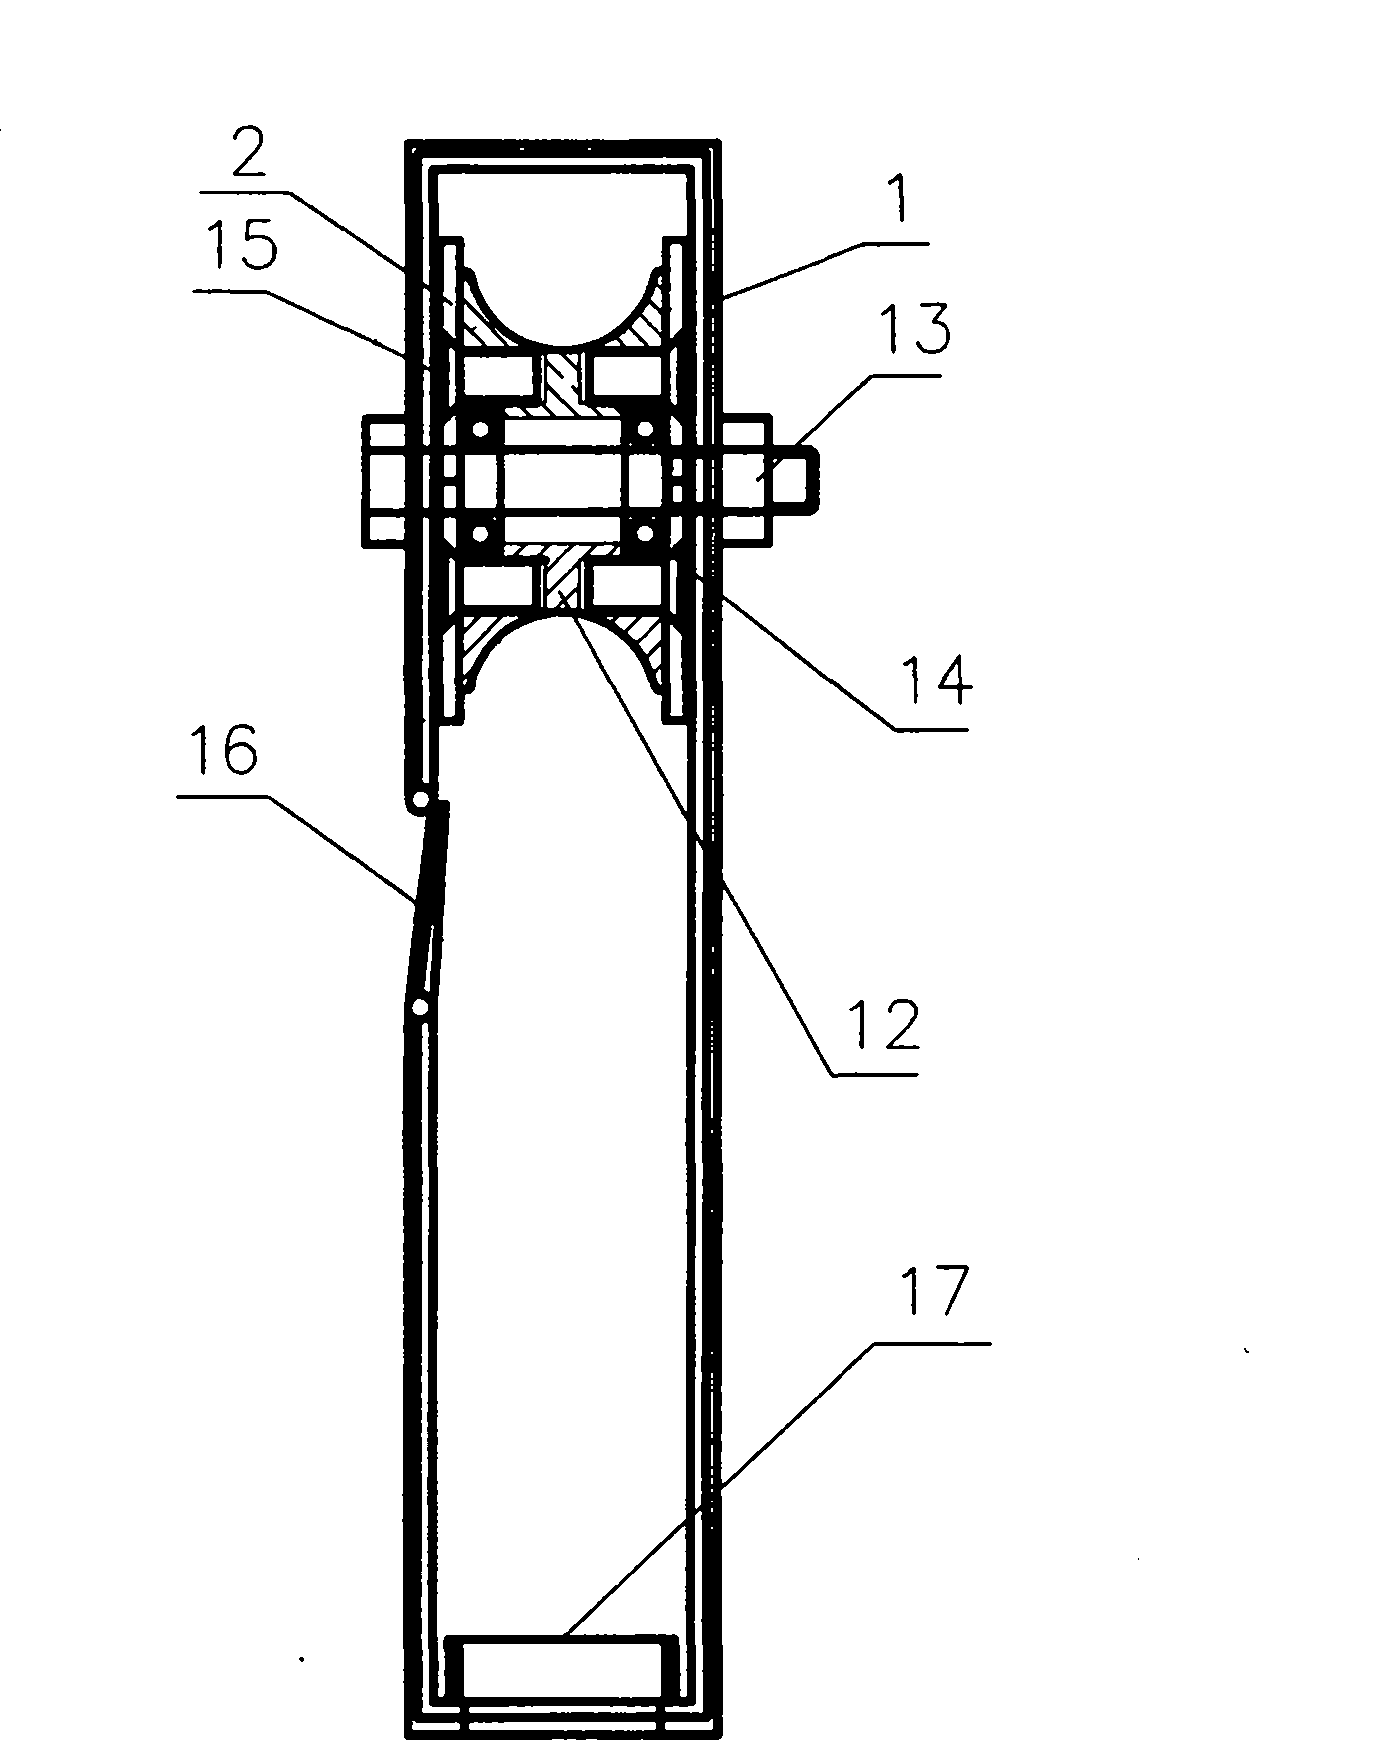 High-voltage power line conductive and earthing wire foreign matter processing device